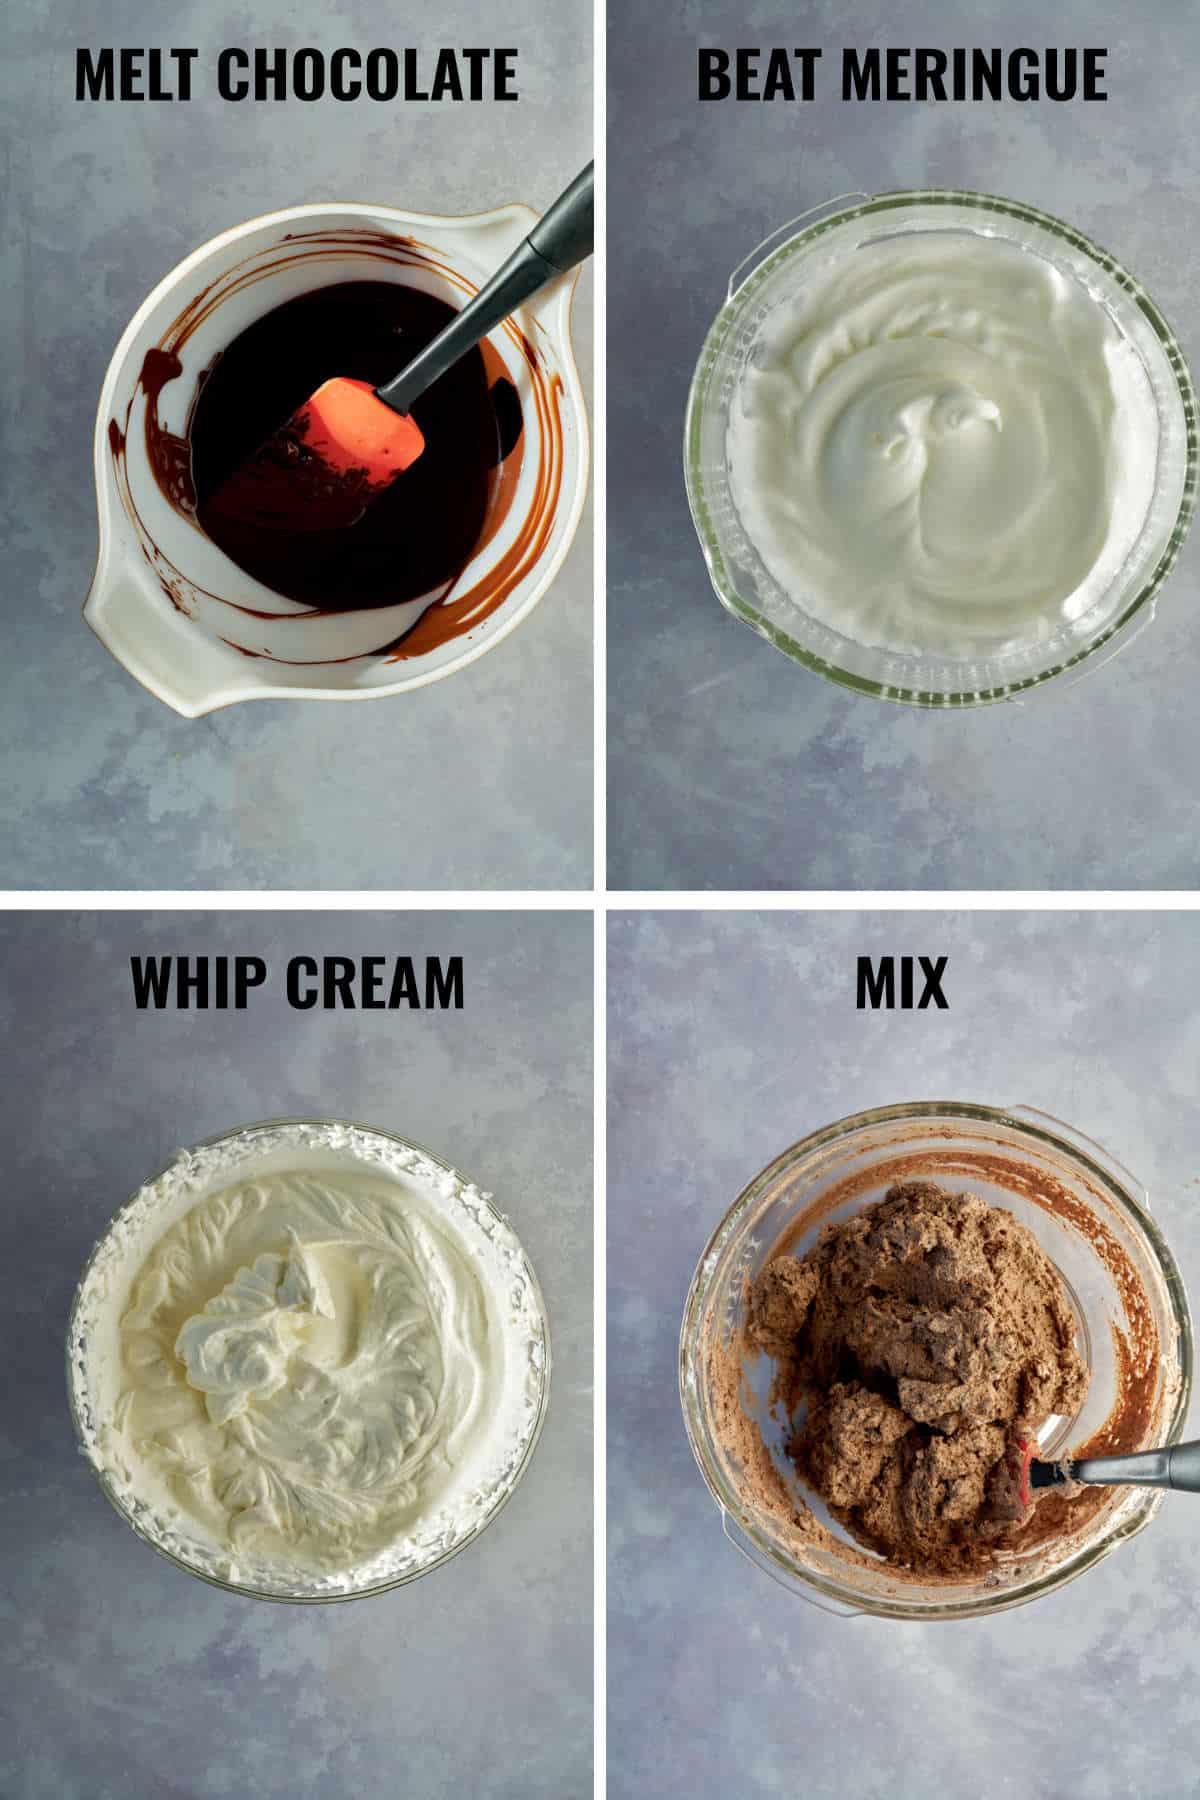 Consistencies of different components of chocolate mousse.